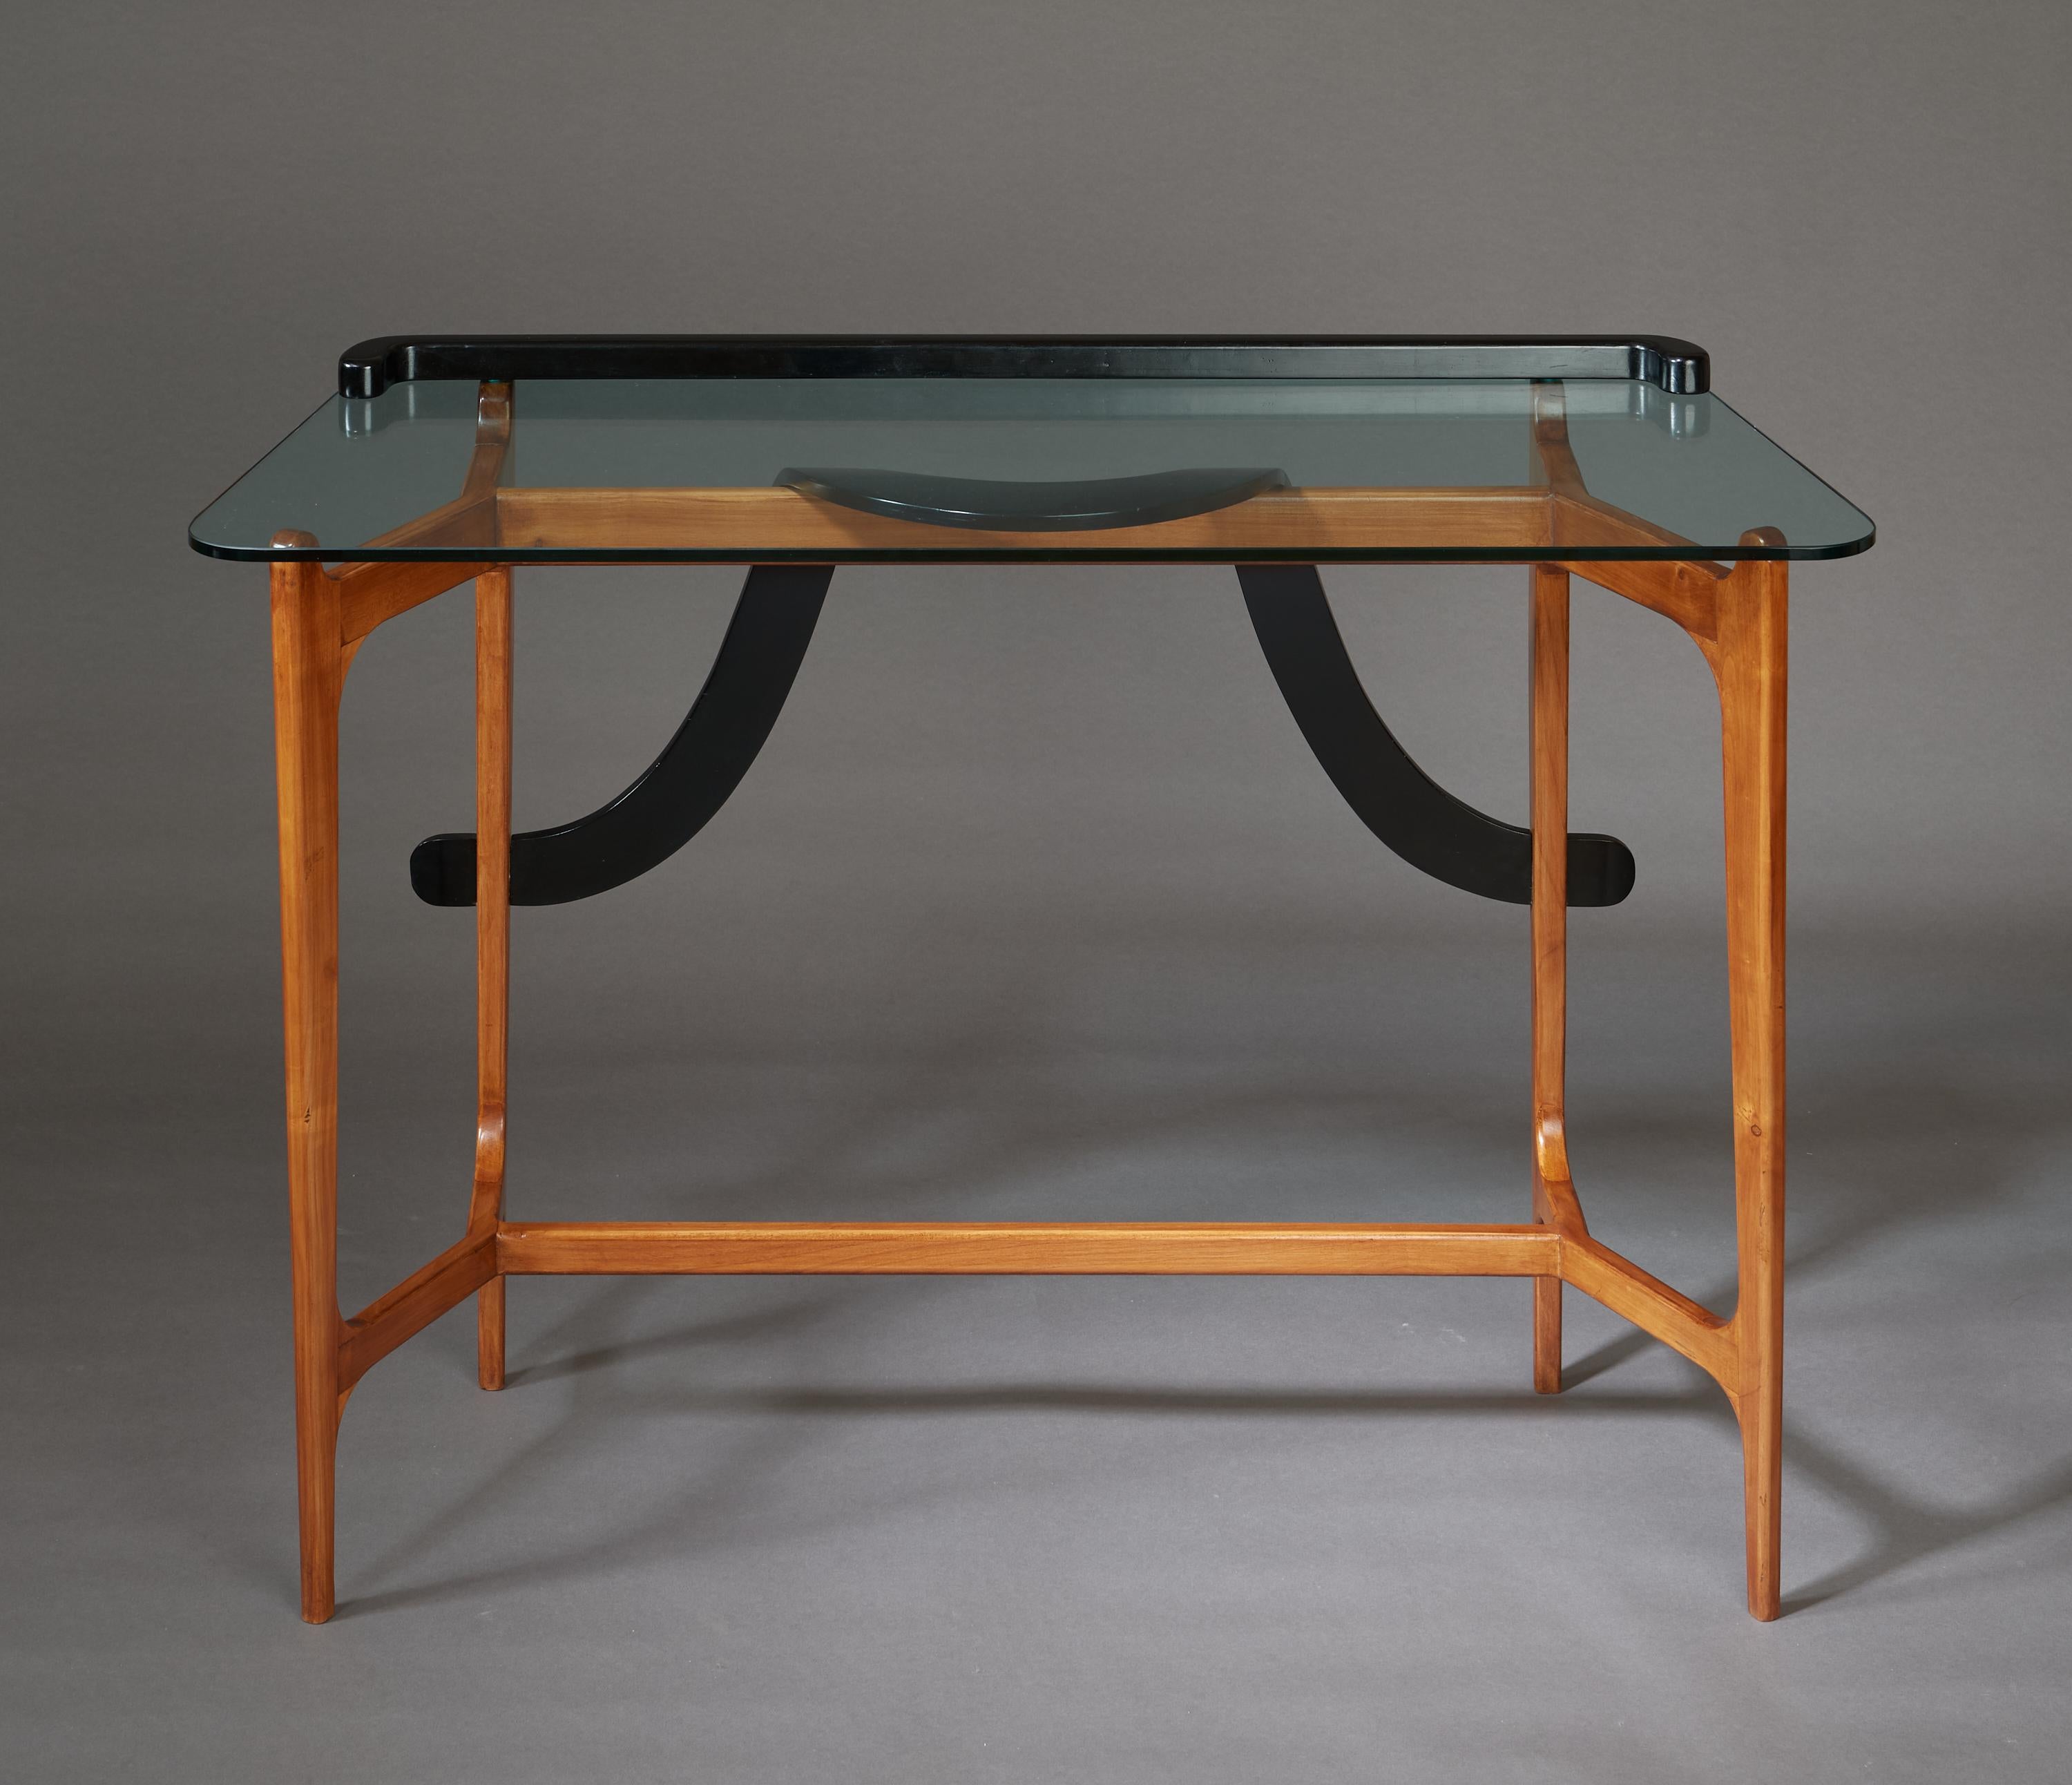 Lacquered Ico Parisi Exquisite Sculptural Console in Walnut & Ebonized Wood, Italy 1950s